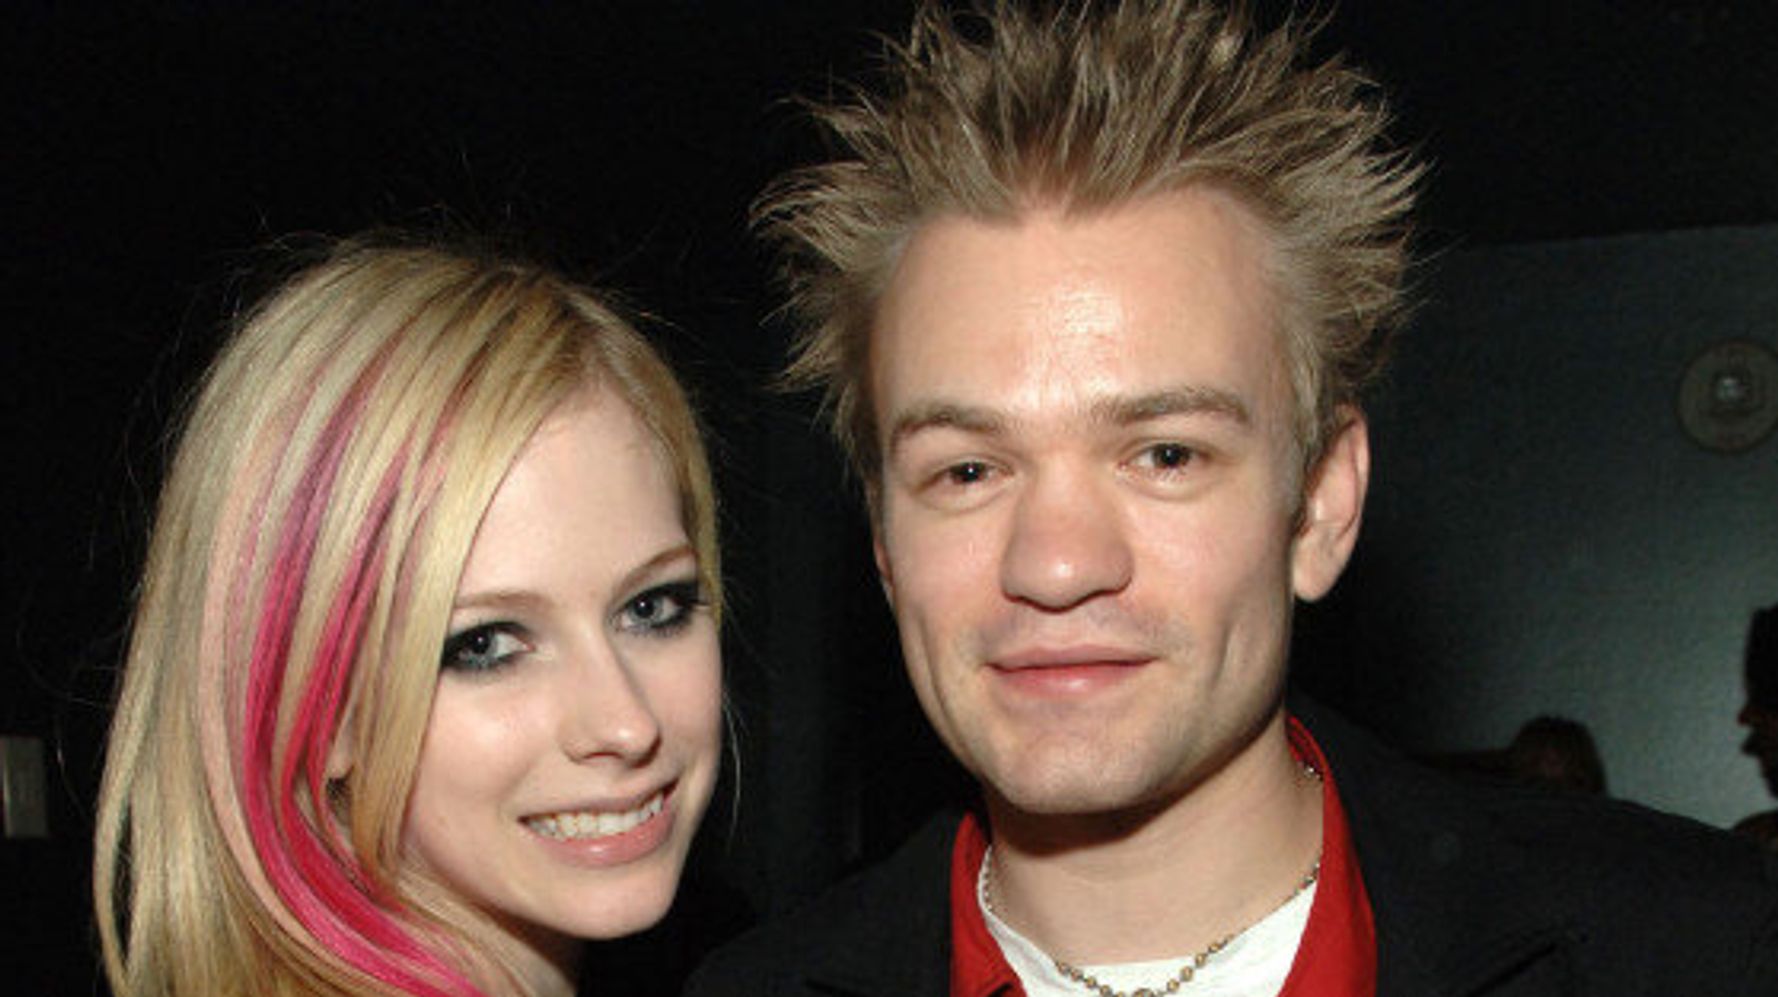 Avril's Ex-Husband, Sum 41's Deryck Whibley, Has 'Lavigne' Removed From